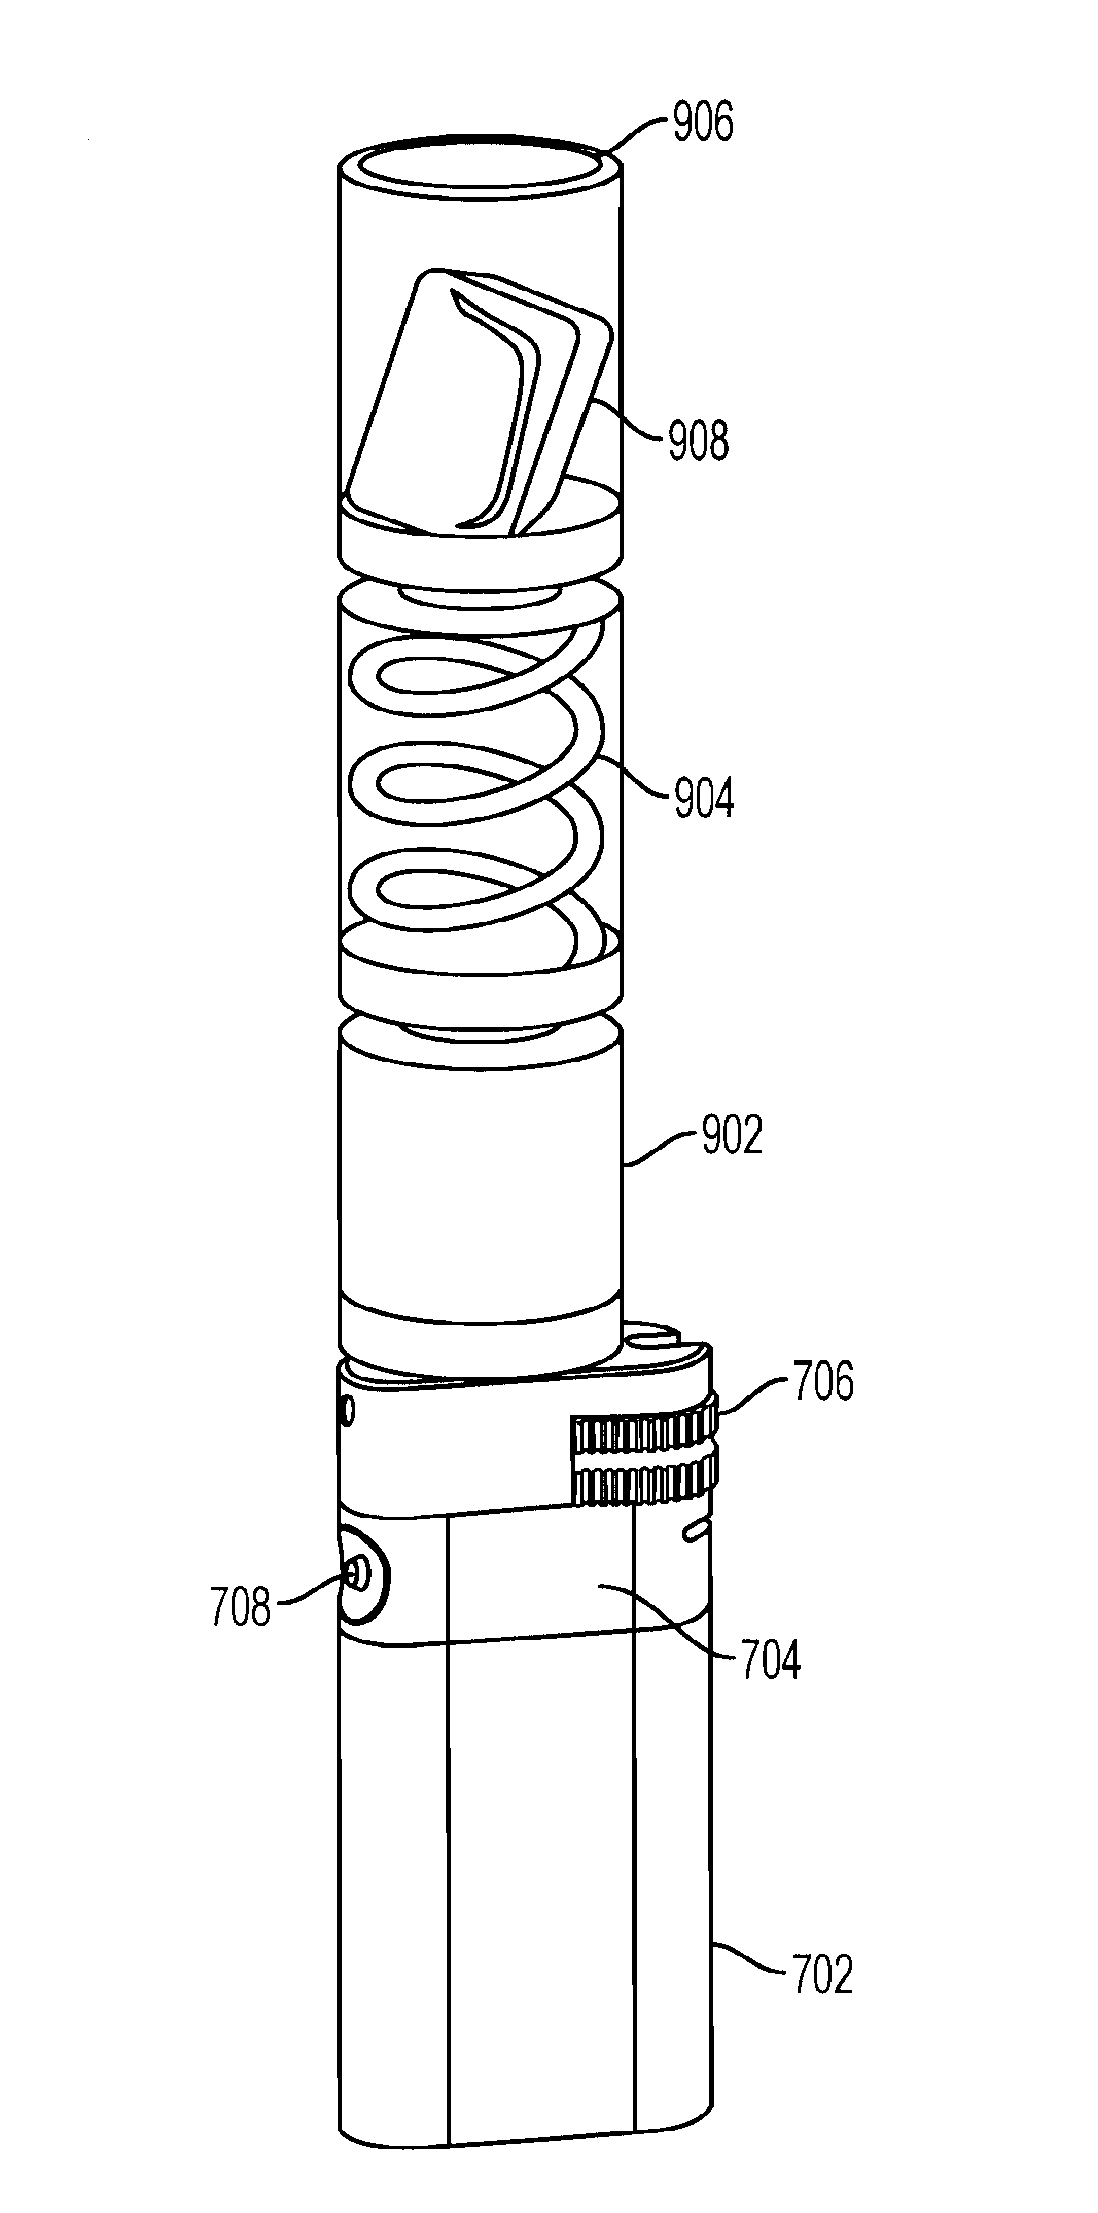 System and method for providing a laser-based lighting system for smokable material